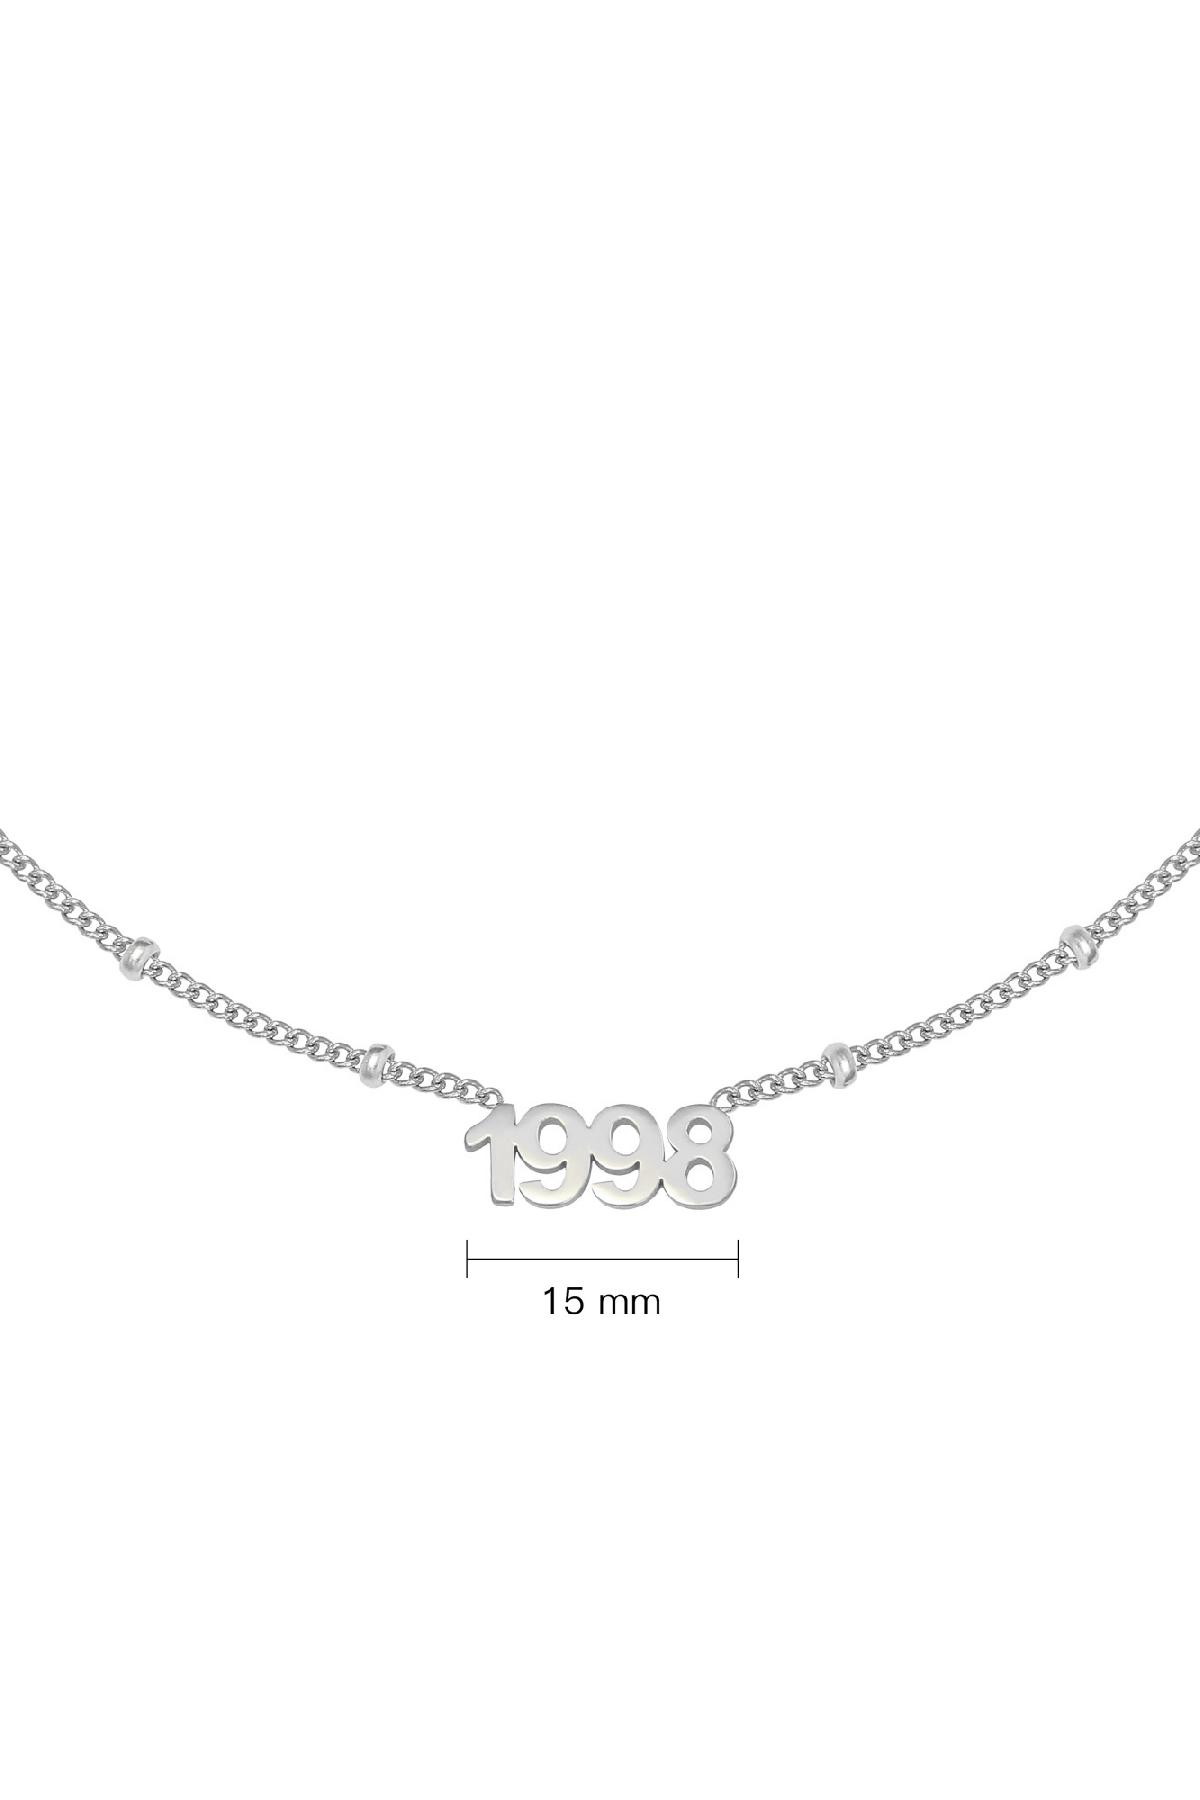 Necklace Year 1998 Silver Stainless Steel h5 Picture2